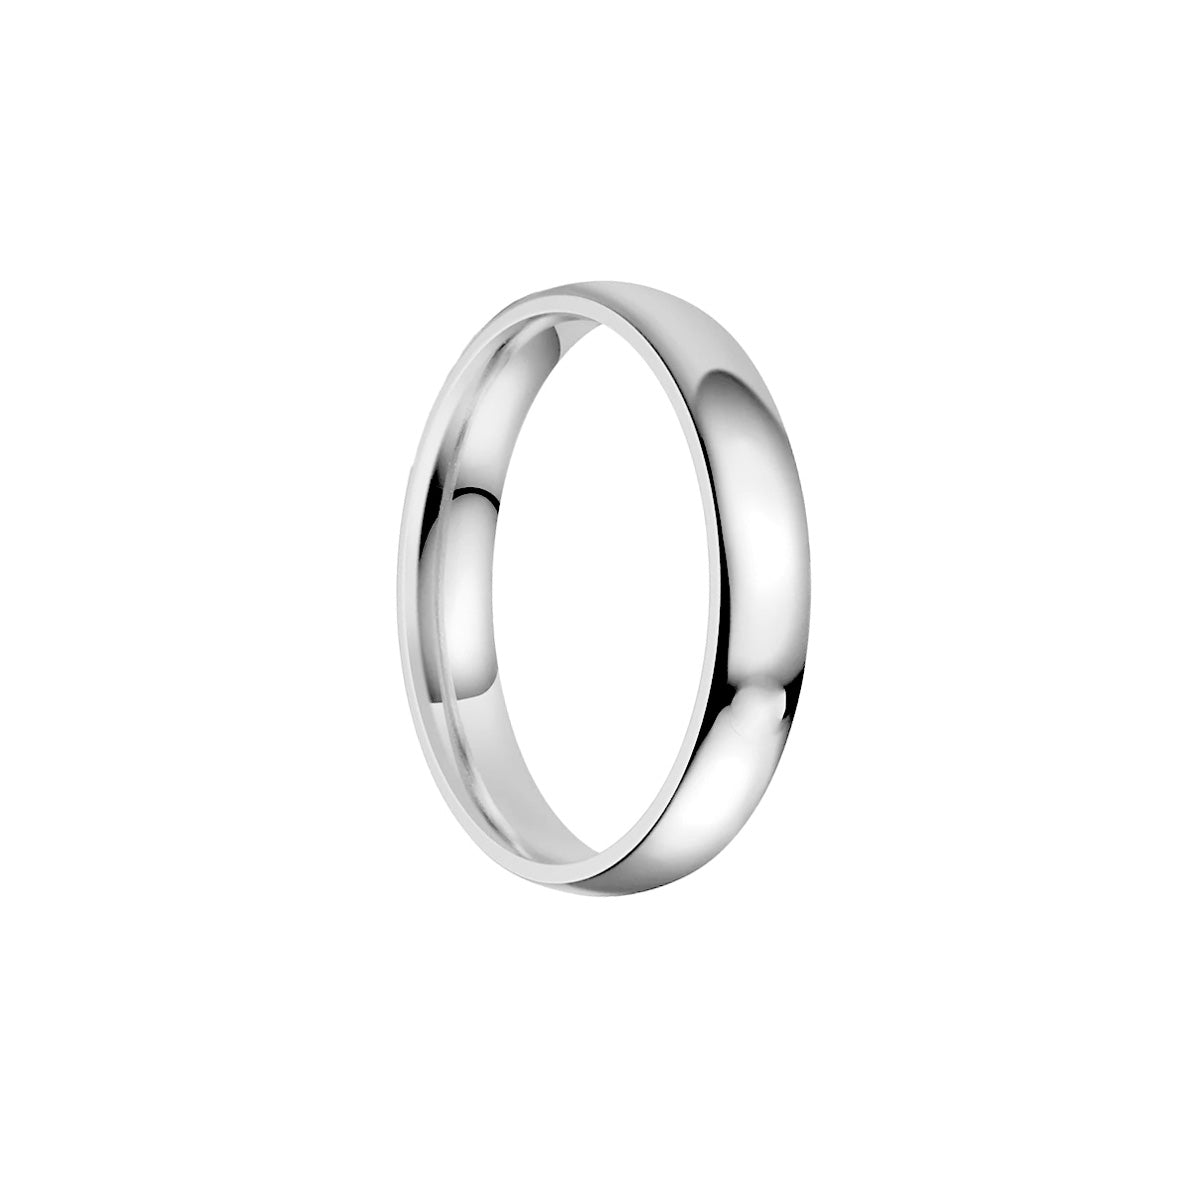 Curved polished steel ring 5mm